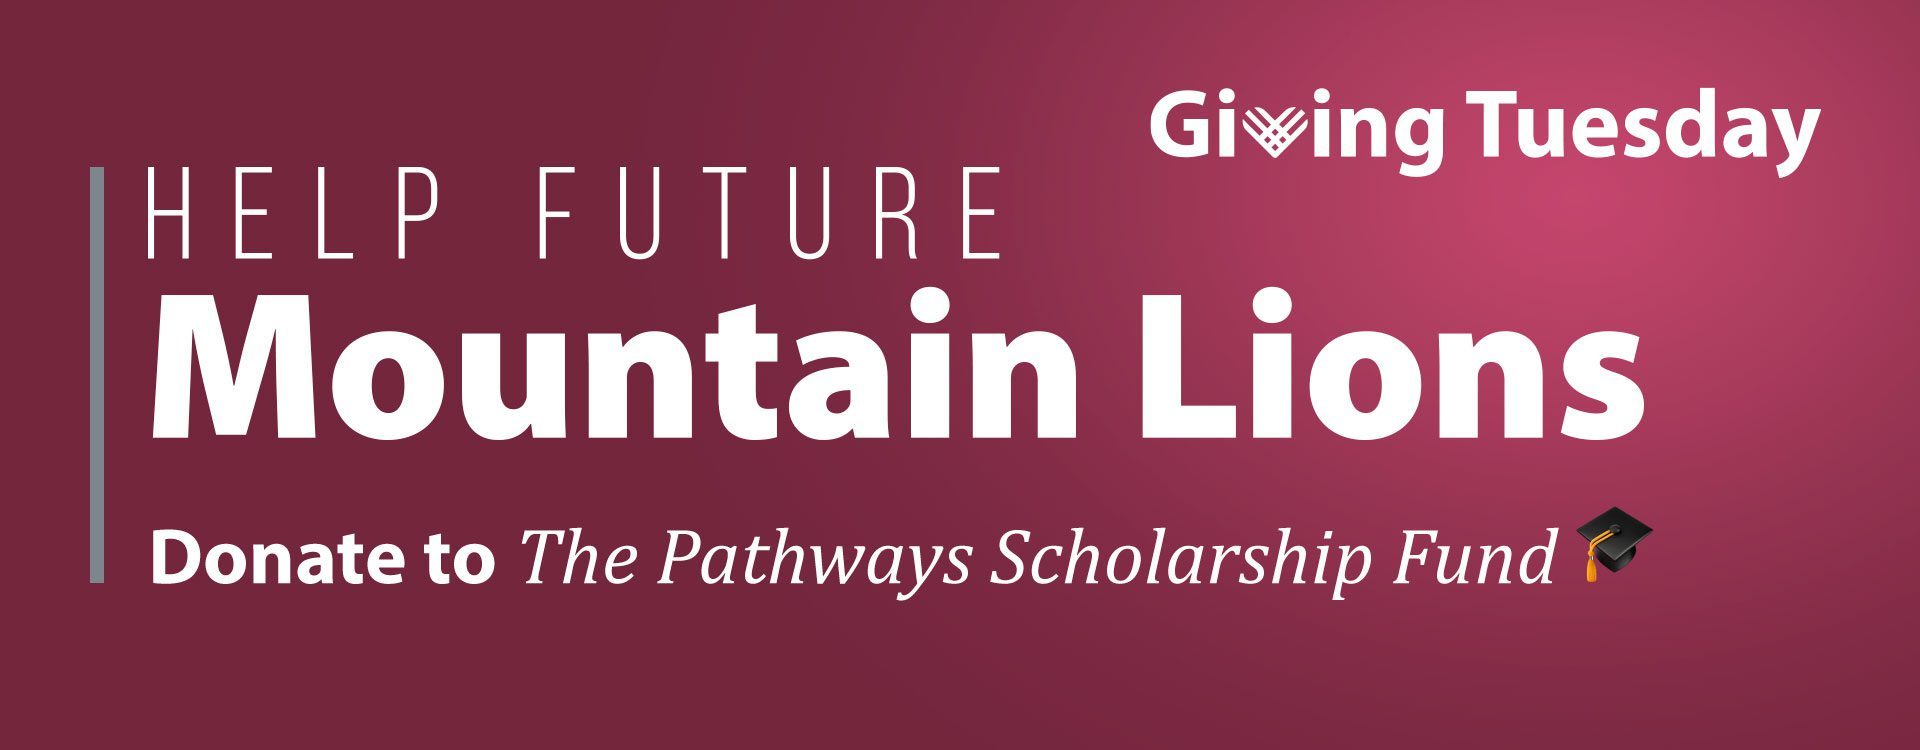 Giving Tuesday. Help Future Mountain Lions. Donate to The Pathways Scholarship Fund.